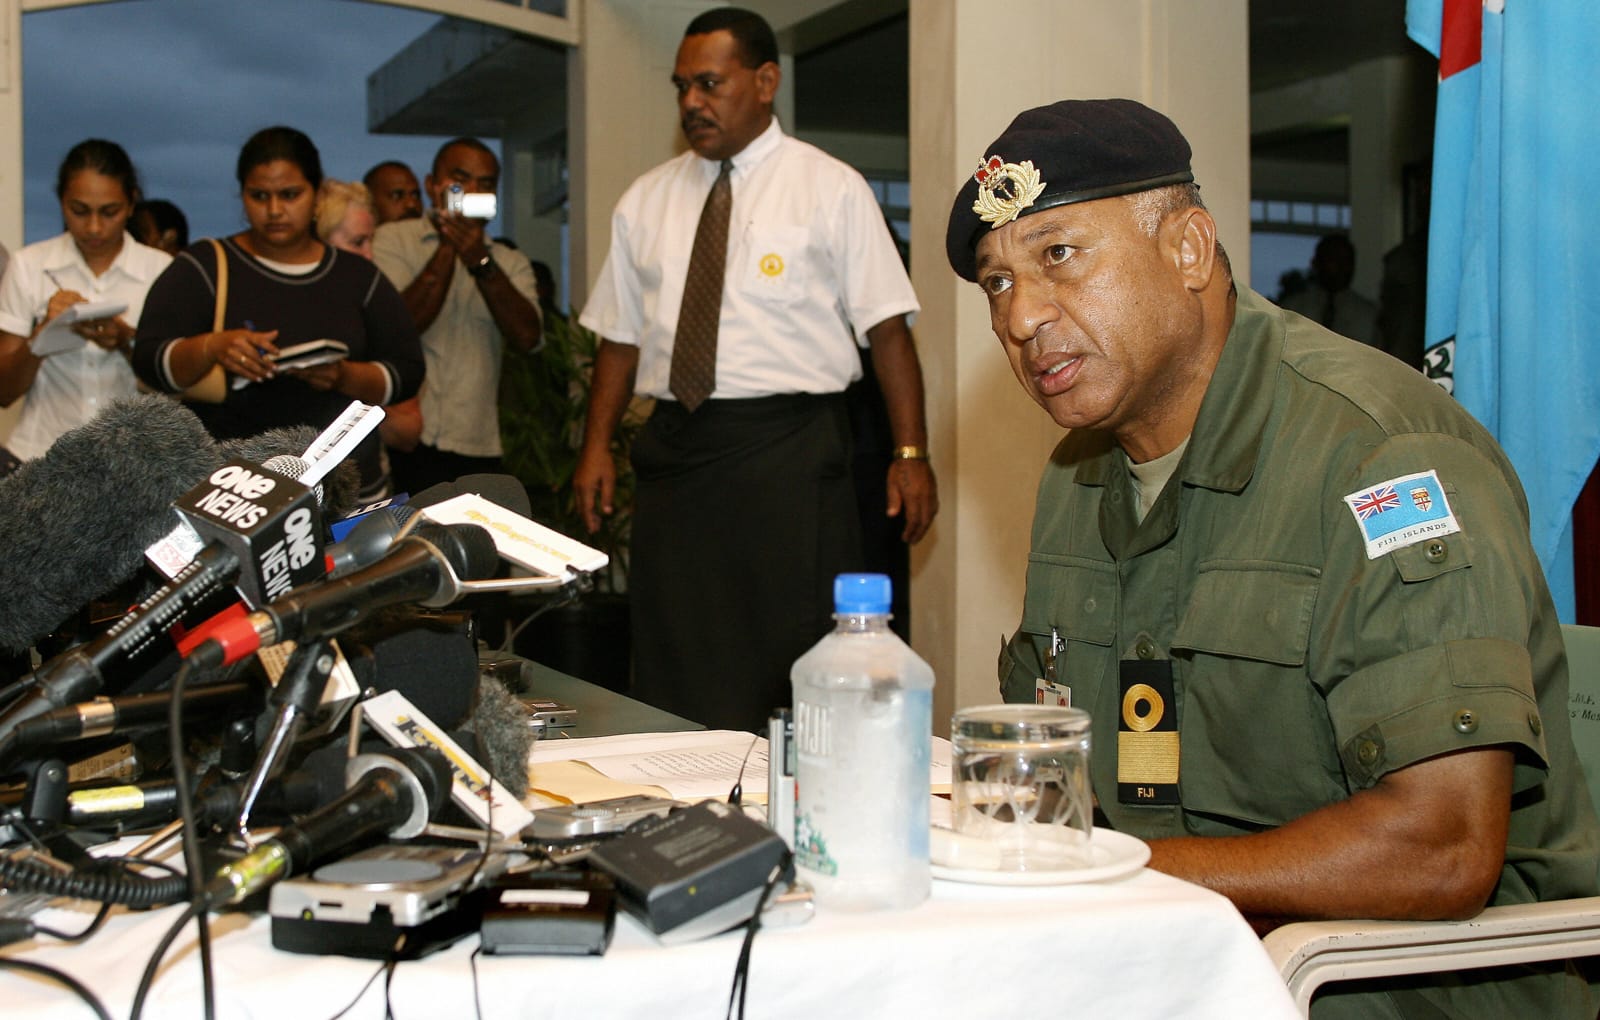 Bainimarama speaks at a press conference in December 2006 after overthrowing the Qarase government (William West/AFP via Getty Images)